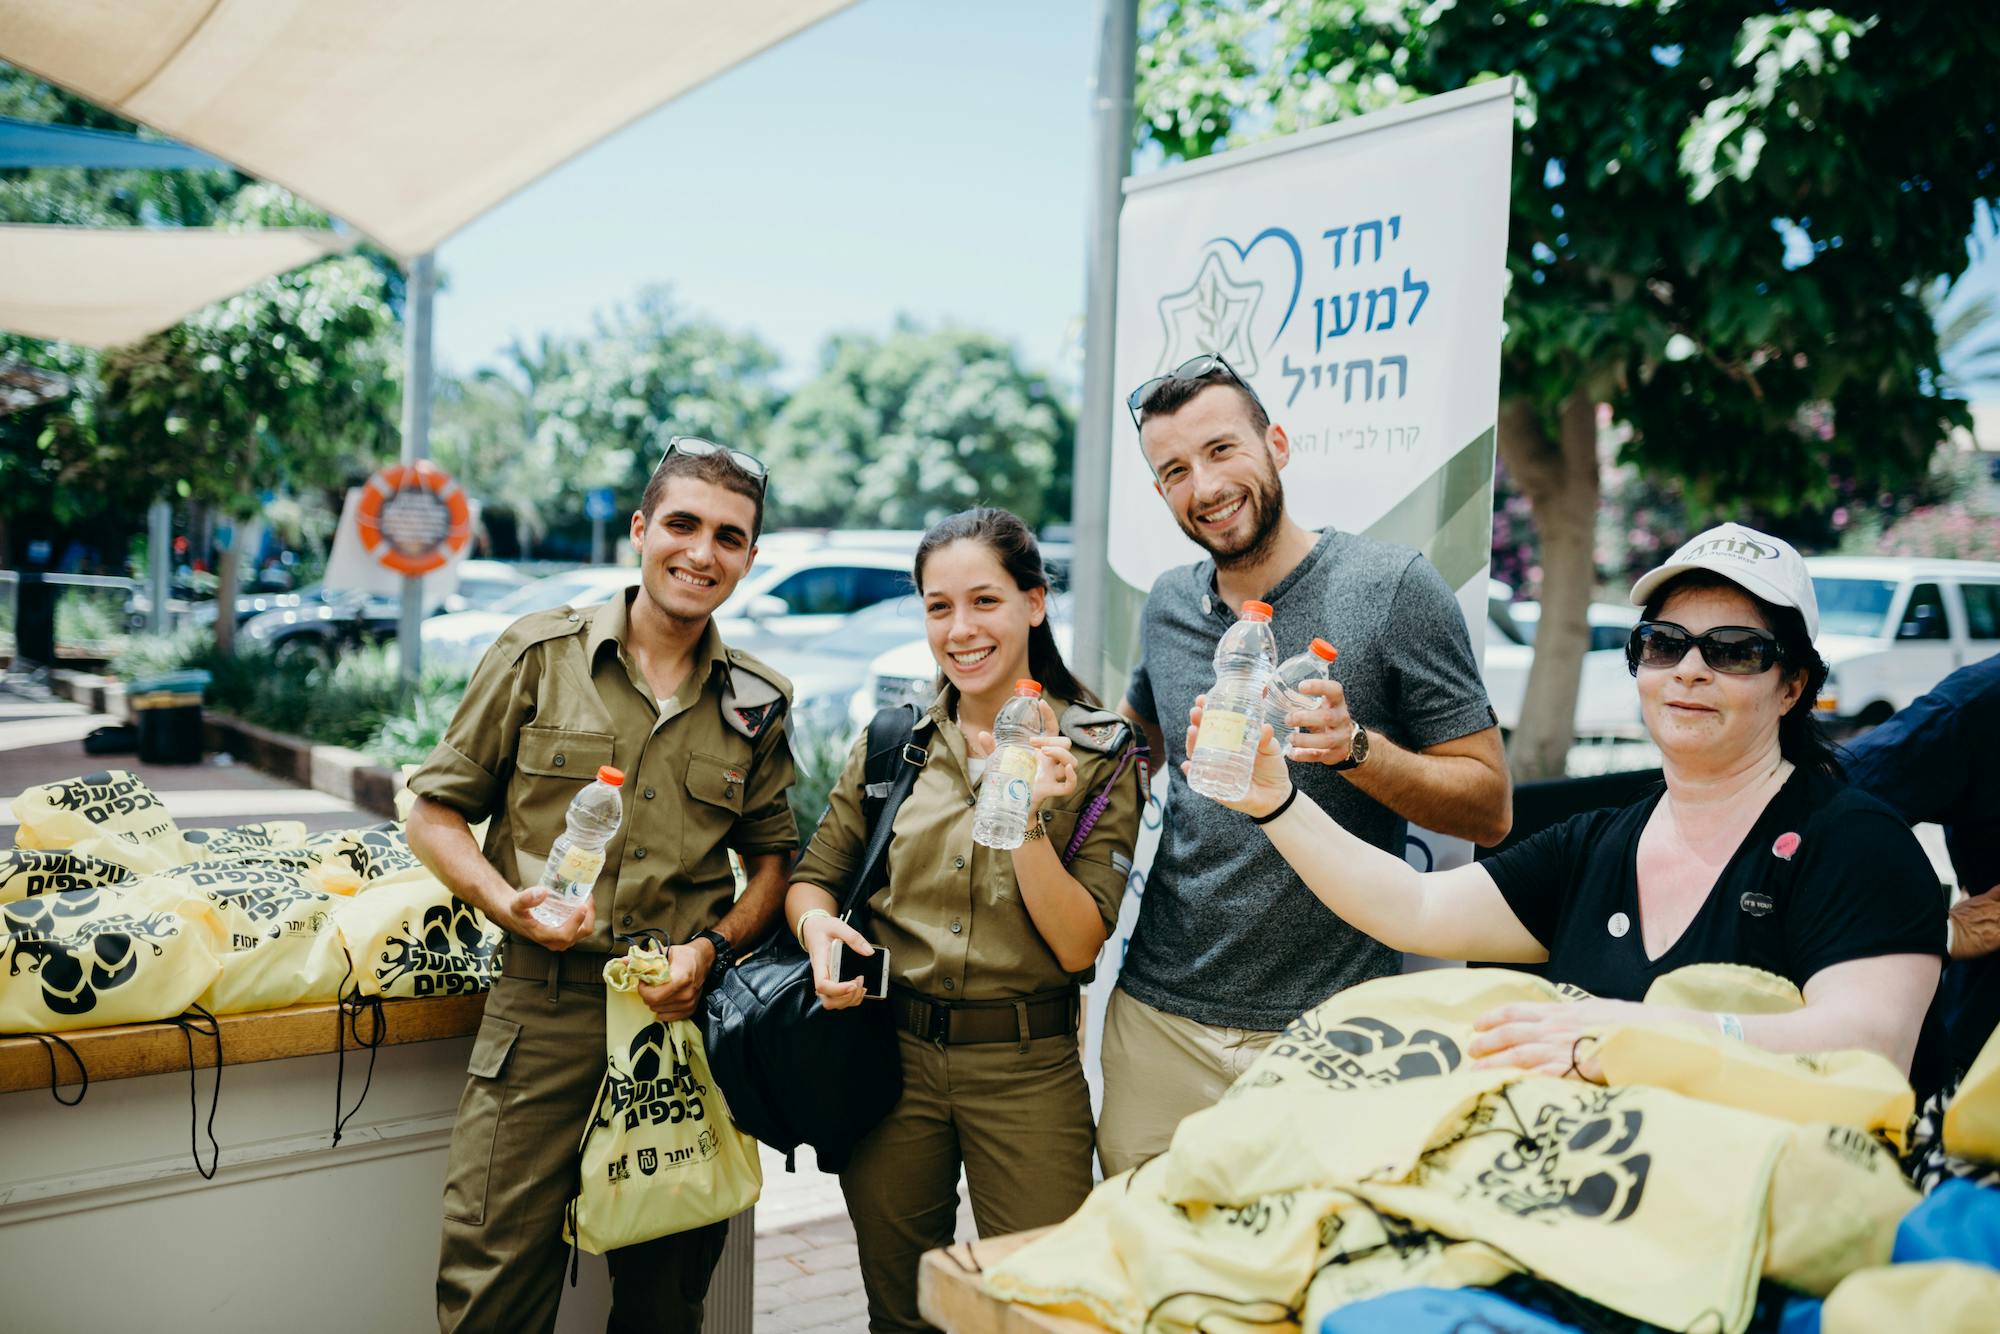 Aid for IDF soldiers